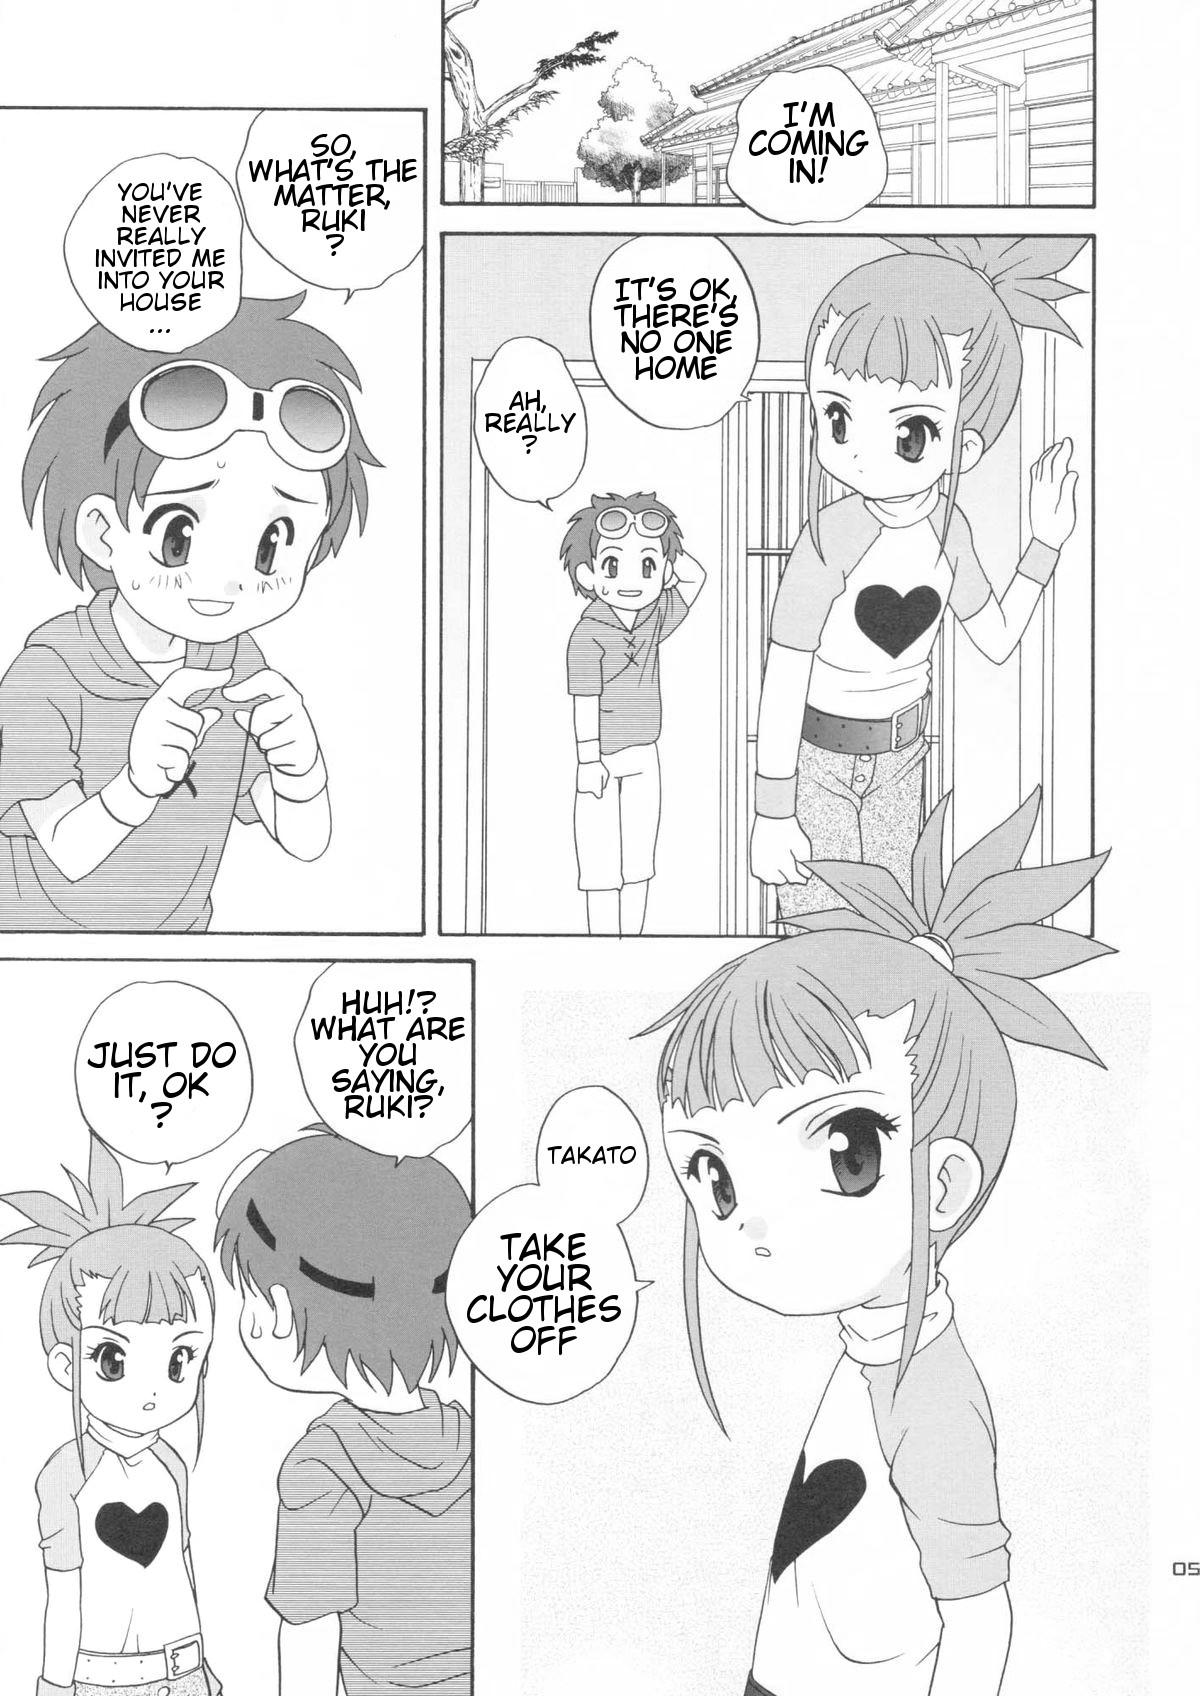 Coroa Digibon T - Digimon tamers Jacking Off - Page 5